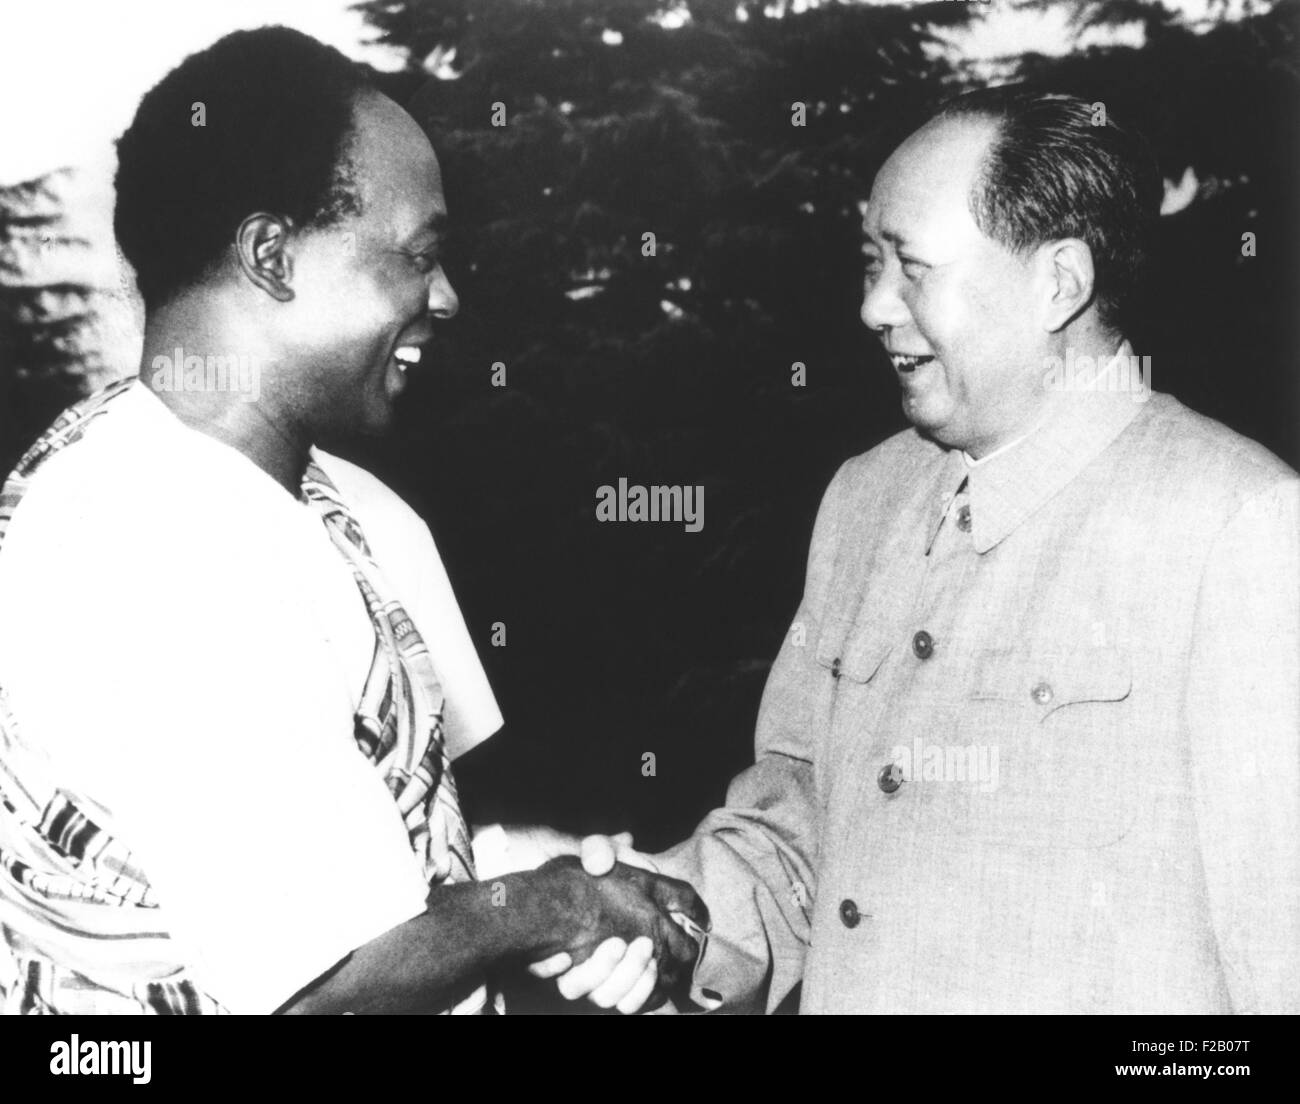 Marxist Kwame Nkrumah meeting Mao Zedong during a 1962 visit to Beijing. Nkrumah was President of Ghana from 1960-1966. (CSU 2015 9 1167) Stock Photo